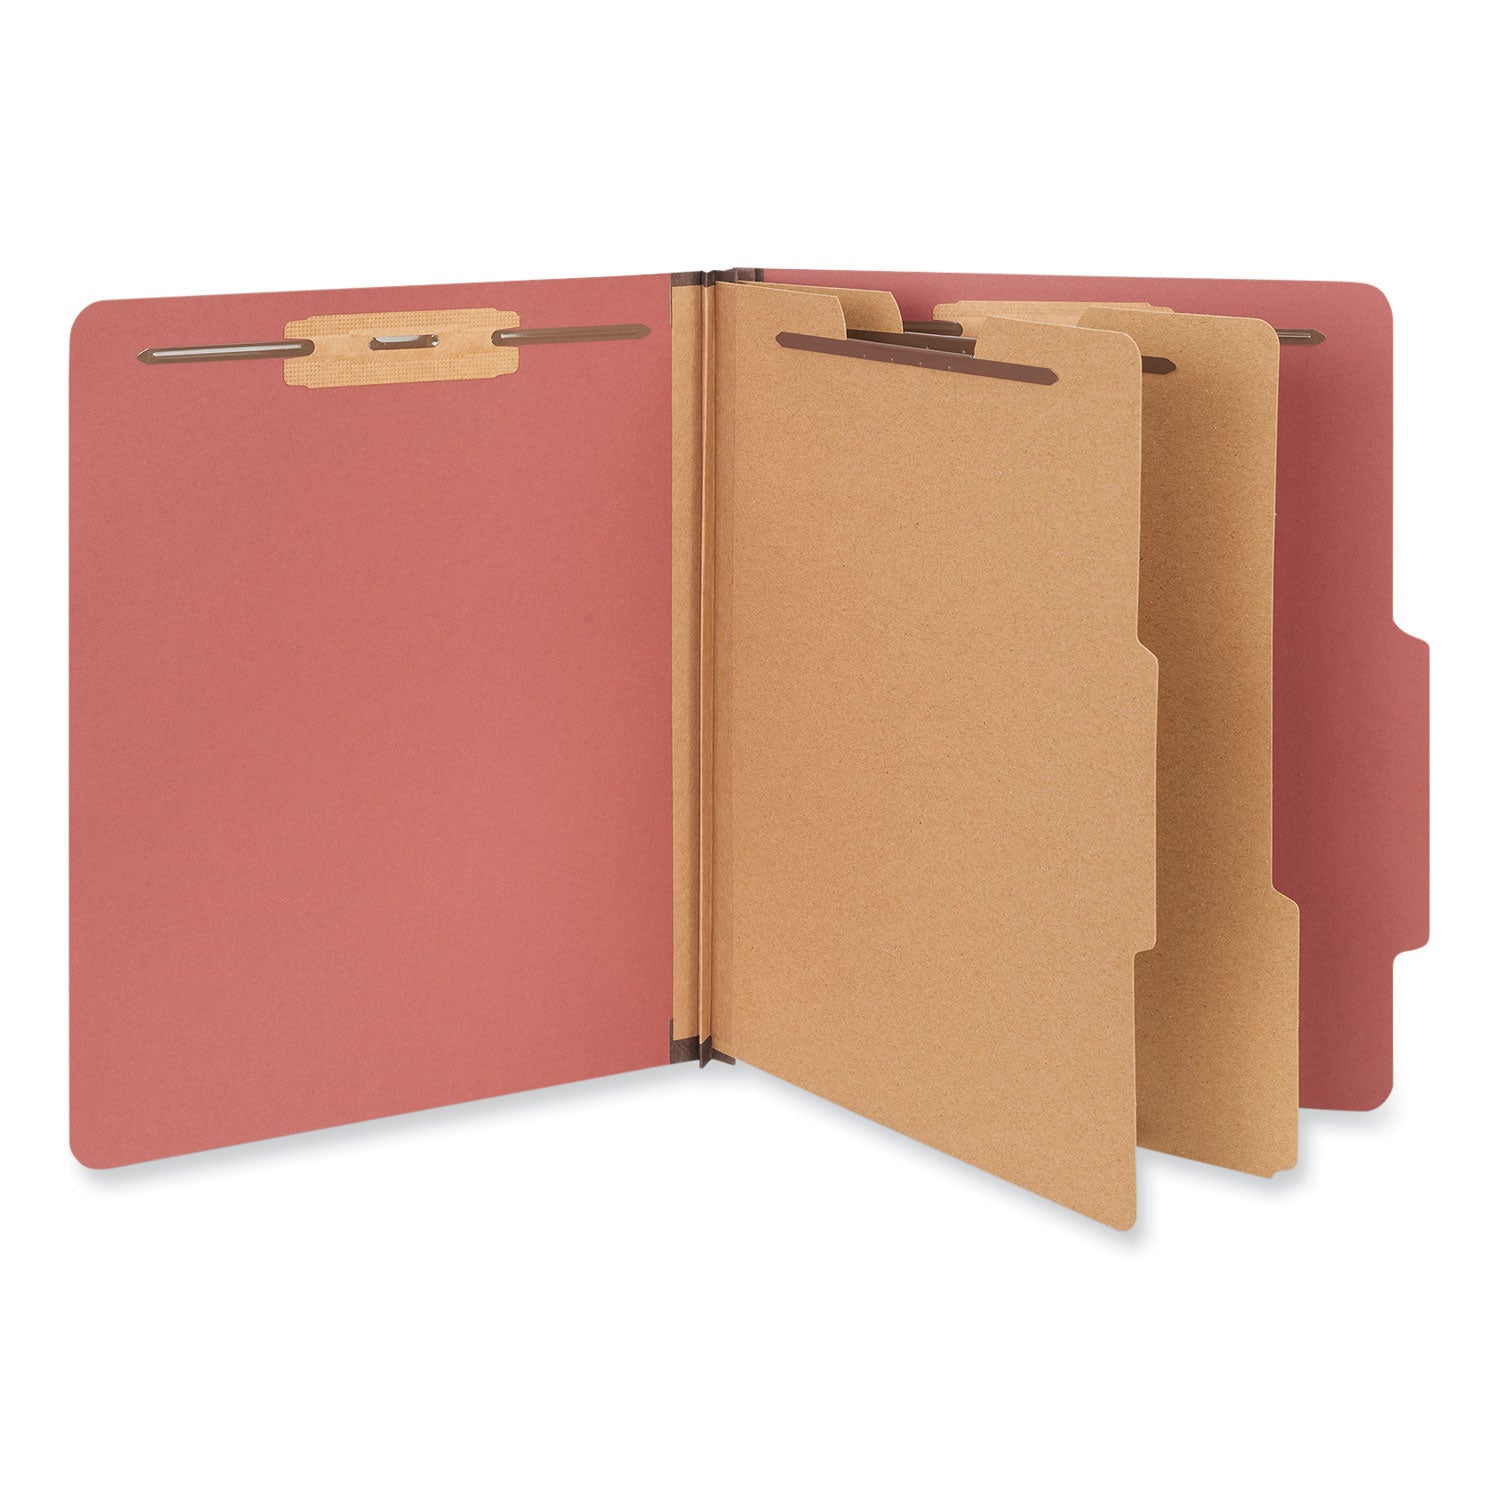 Six-Section Pressboard Classification Folders, 2" Expansion, 2 Dividers, 6 Fasteners, Letter Size, Red Exterior, 10/Box - 